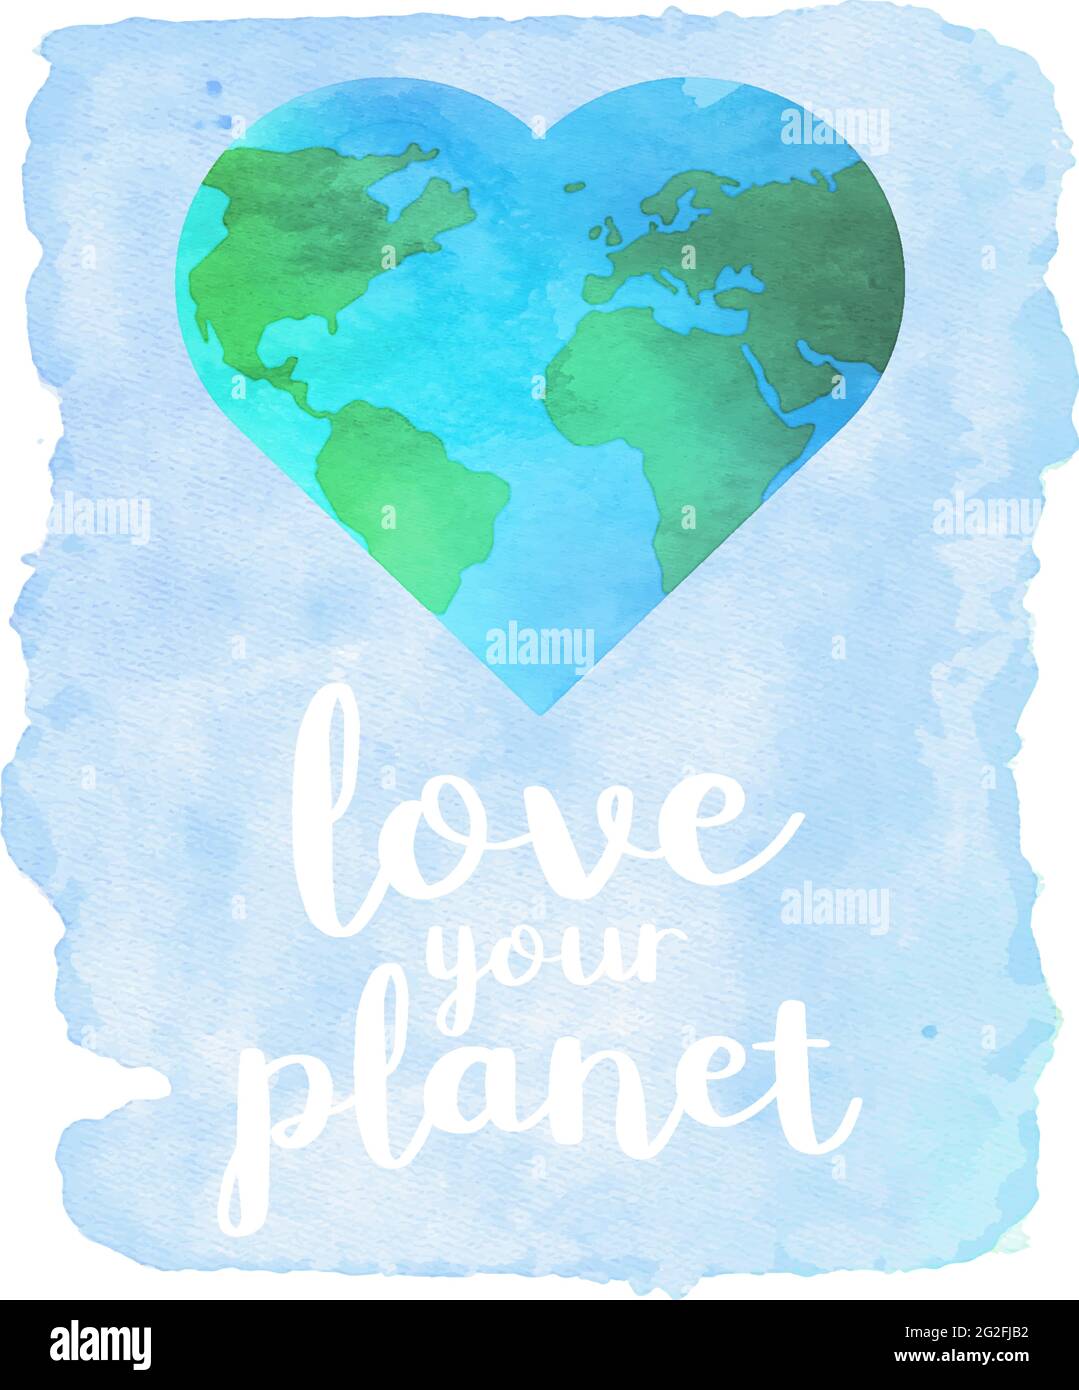 watercolor LOVE YOUR PLANET poster or sign with heart shaped world map vector illustration, sustainable lifestyle concept Stock Vector